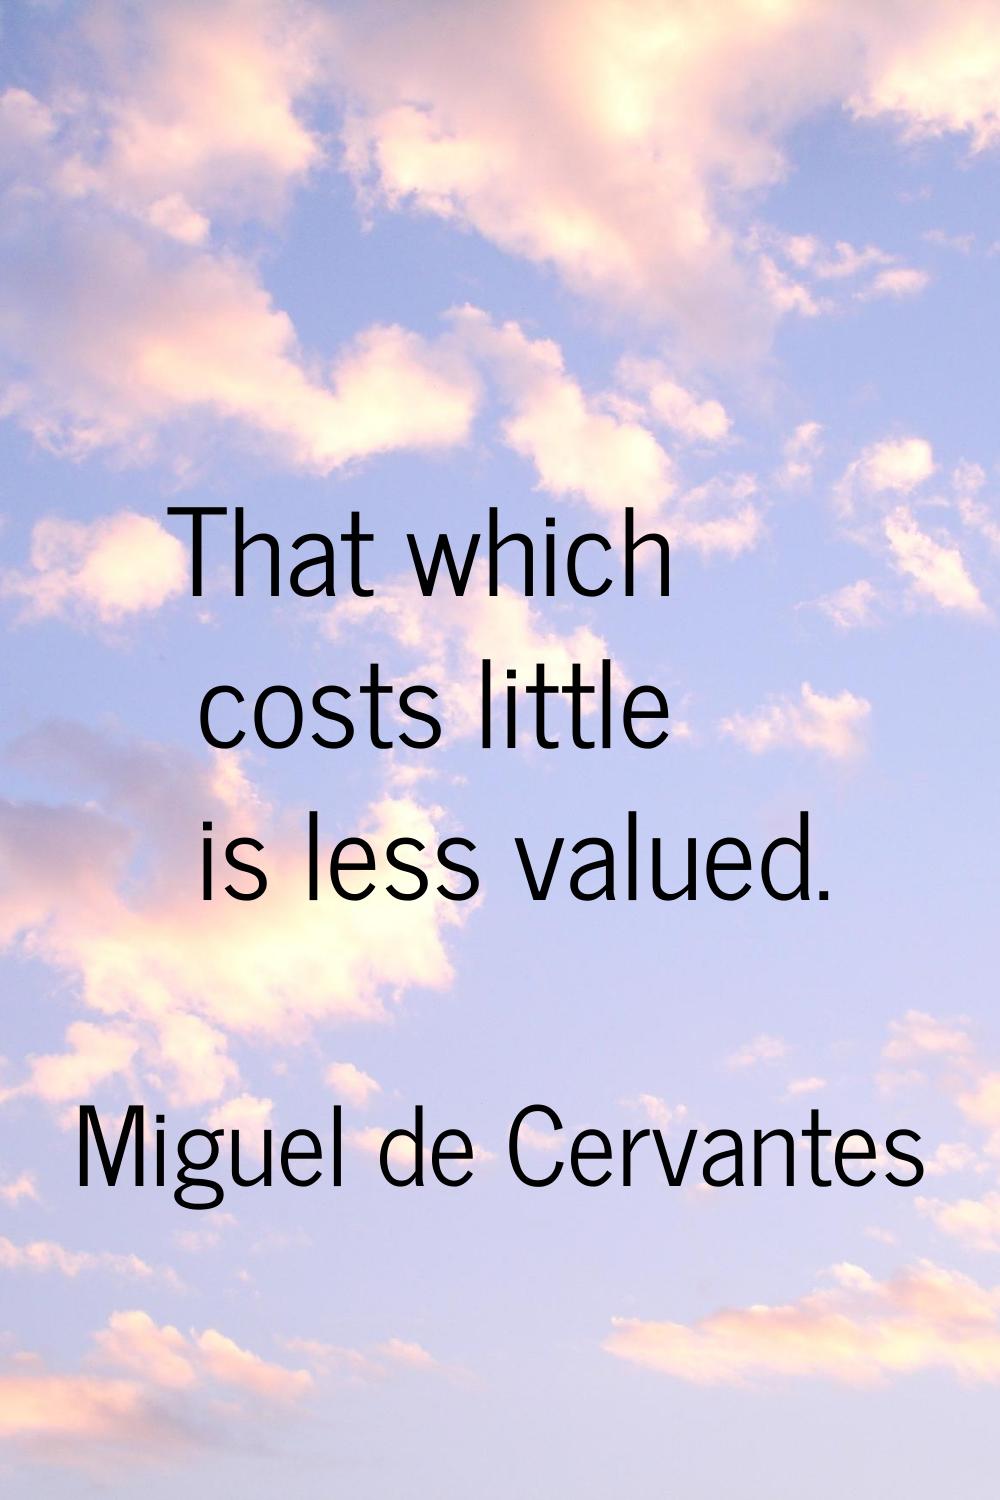 That which costs little is less valued.